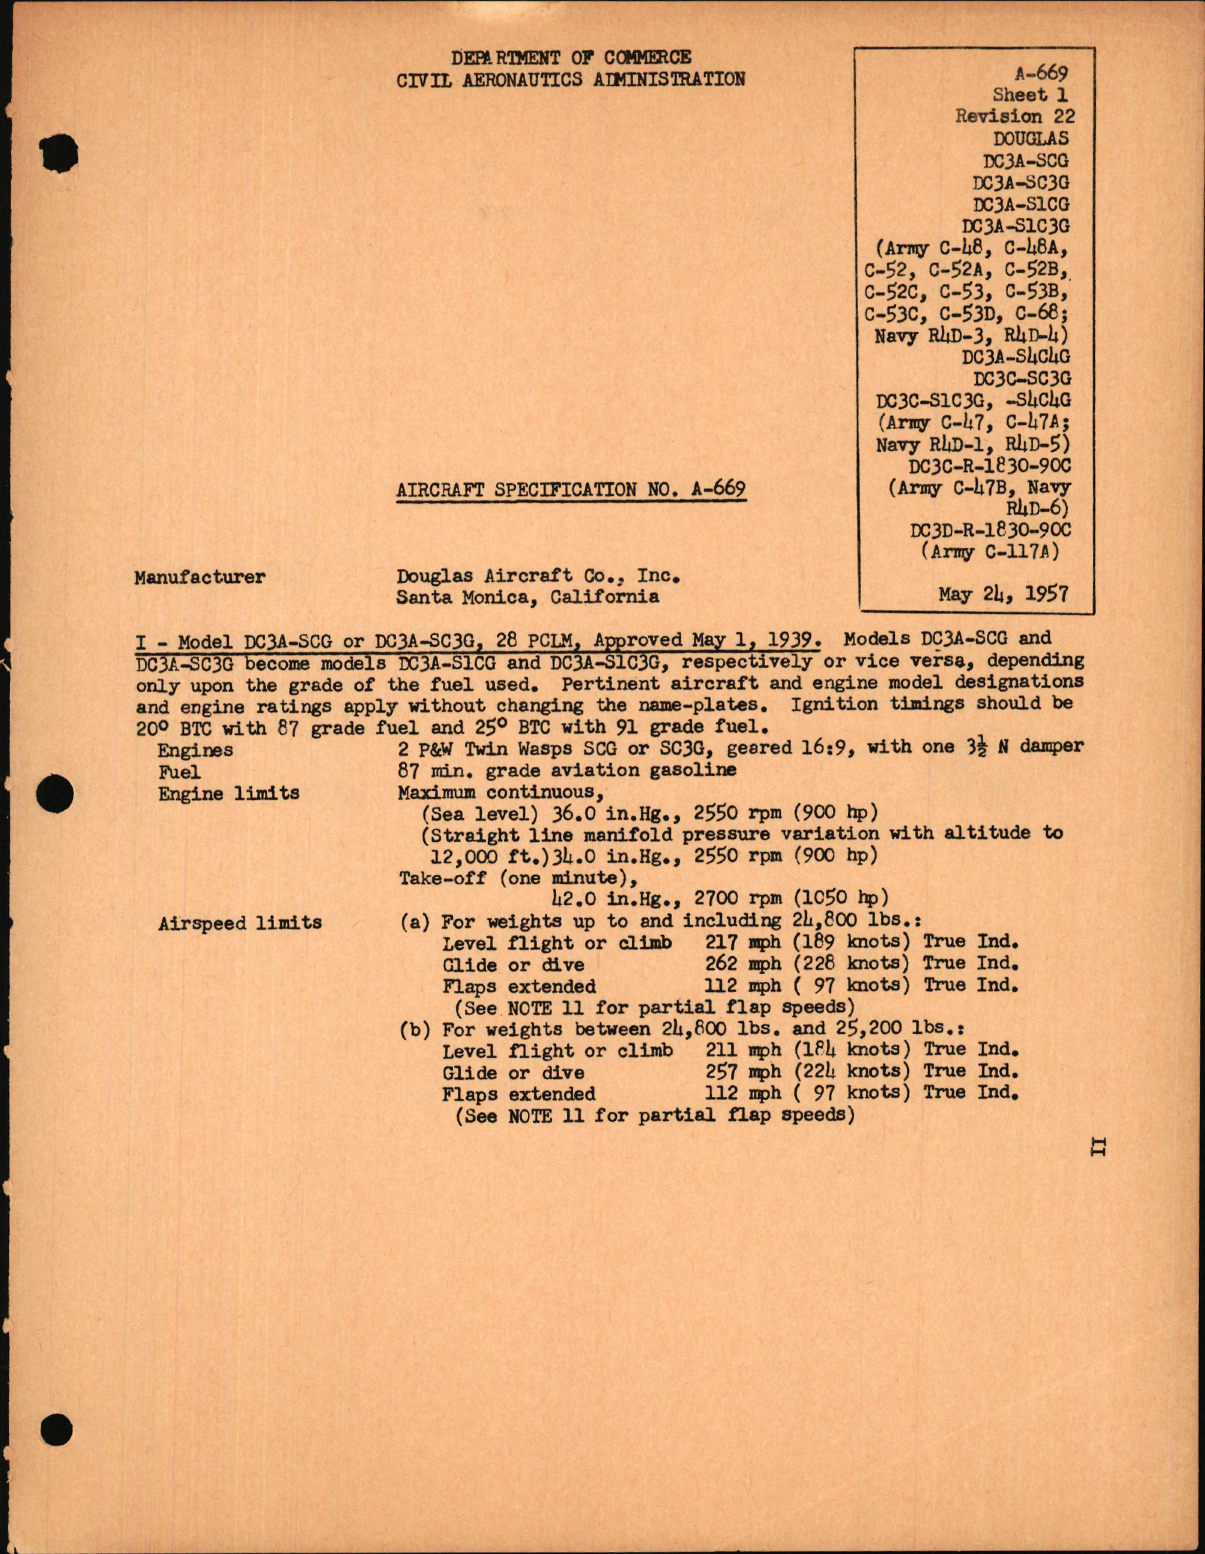 Sample page 1 from AirCorps Library document: DC3, C-47, C-48, C-52, C-53, C-68, and R4D Series, Revision 22